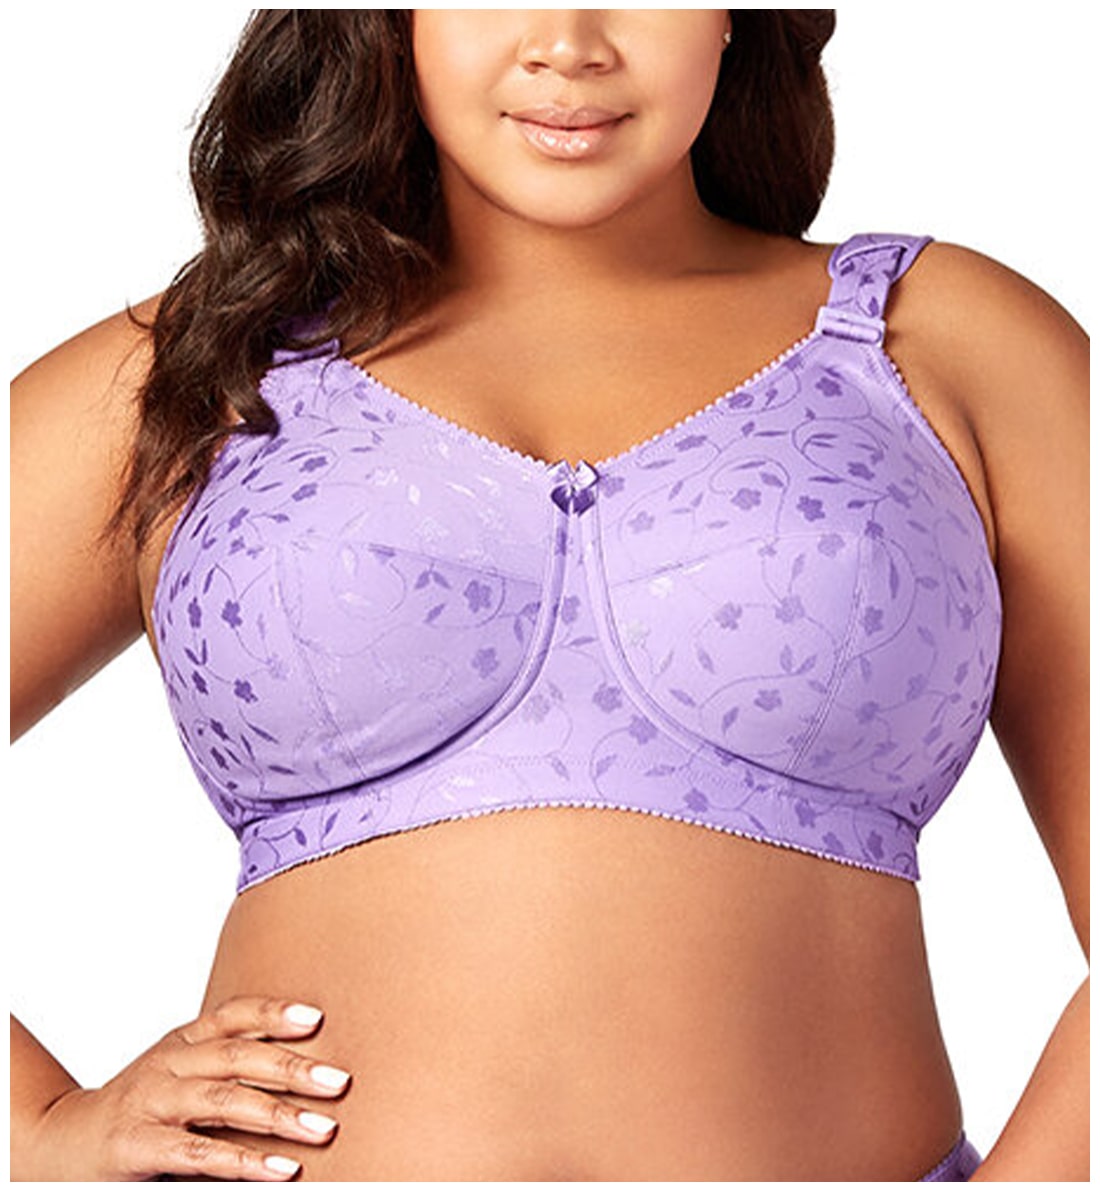 Elila Sidney Jacquard Full Support Softcup (1305),34F,Lilac - Lilac,34F